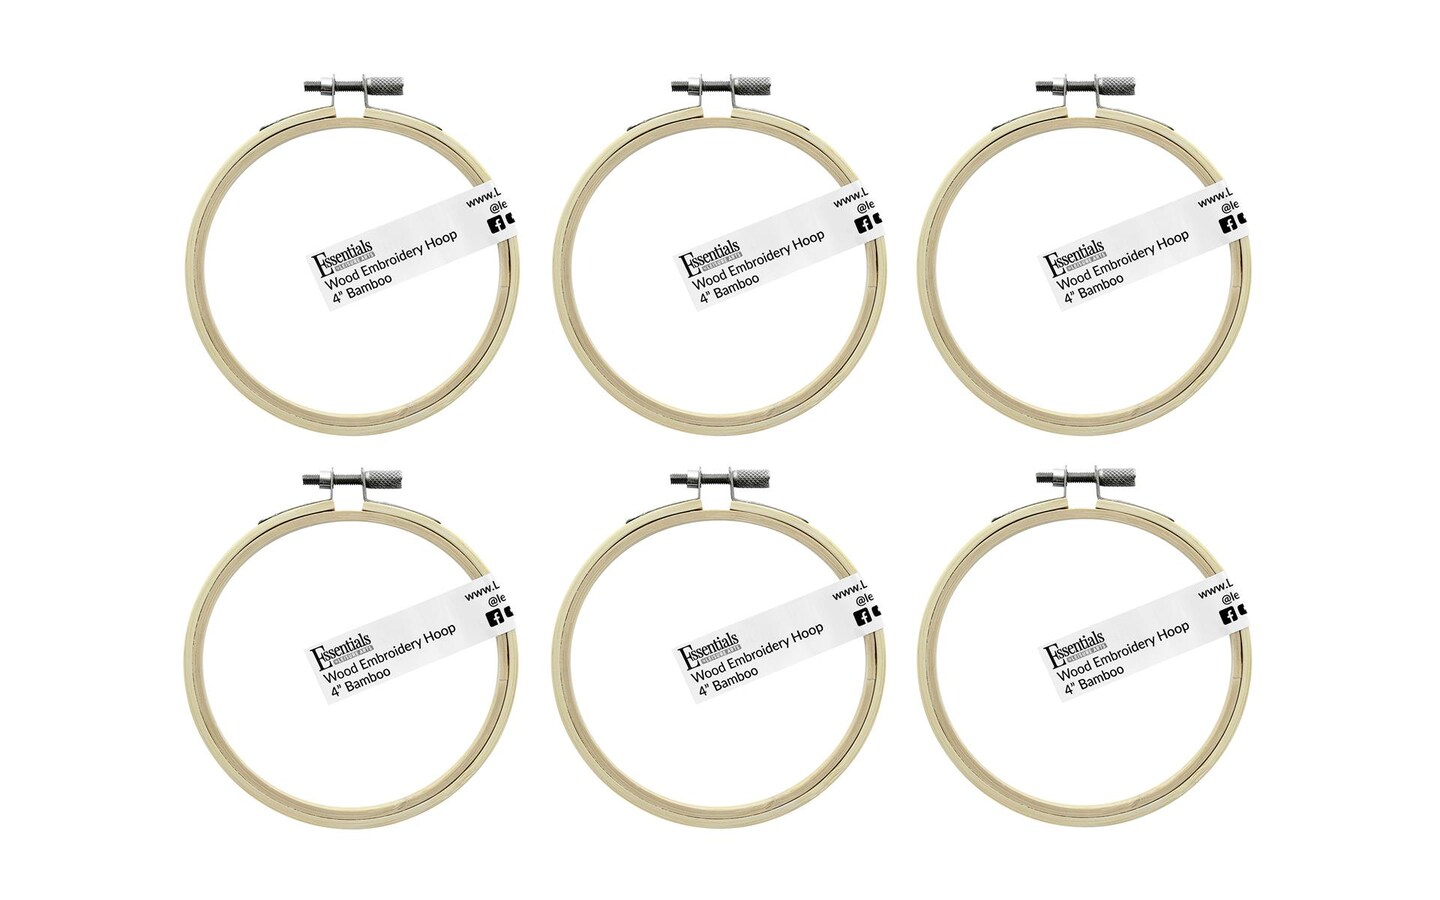 EBL Bamboo Embroidery Hoop 4 6pc